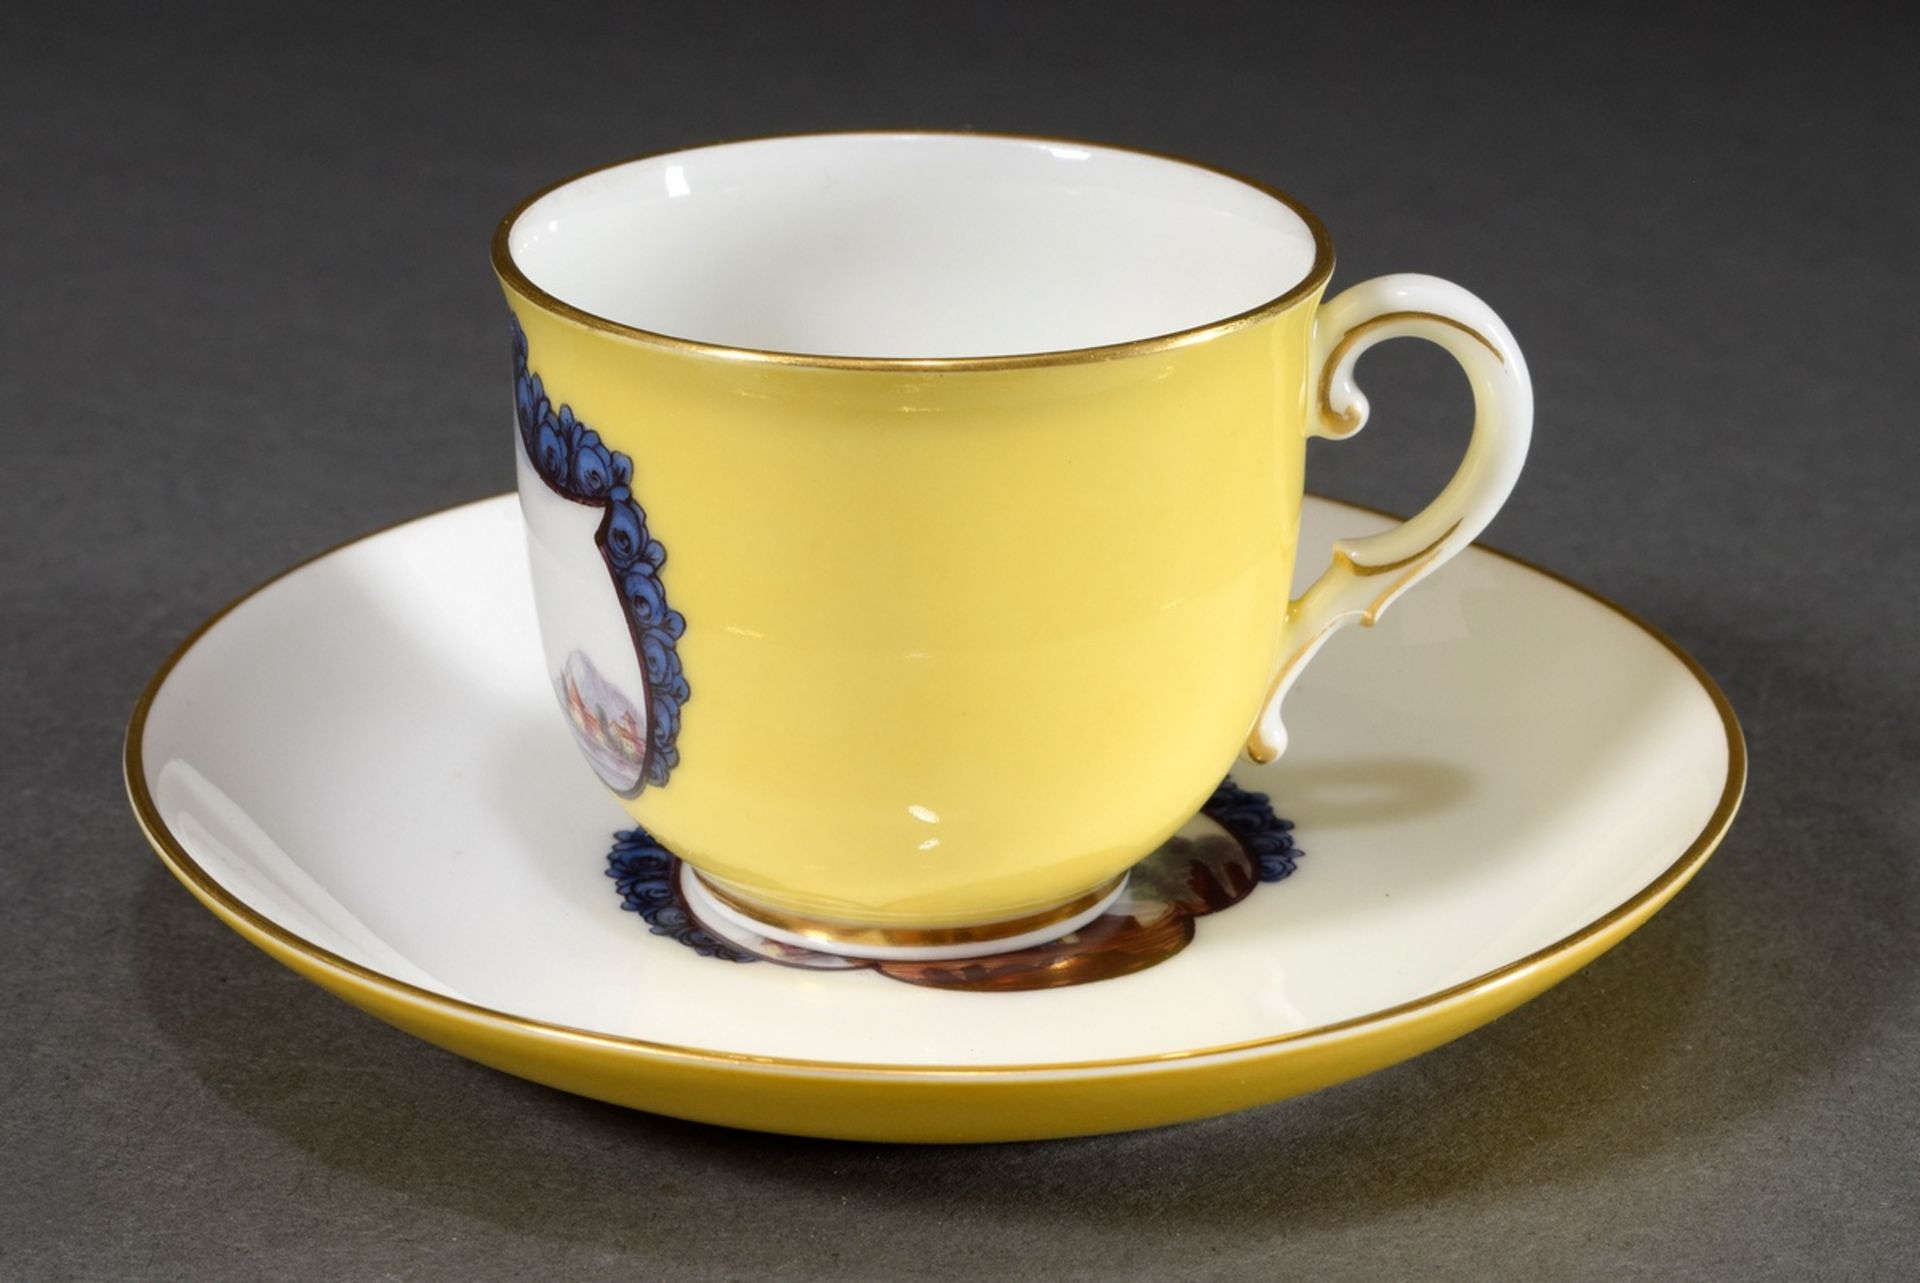 Nymphenburg mocca cups with fine painting "Kauffahrteiszene" in "rose" cartouche on yellow backgrou - Image 2 of 4